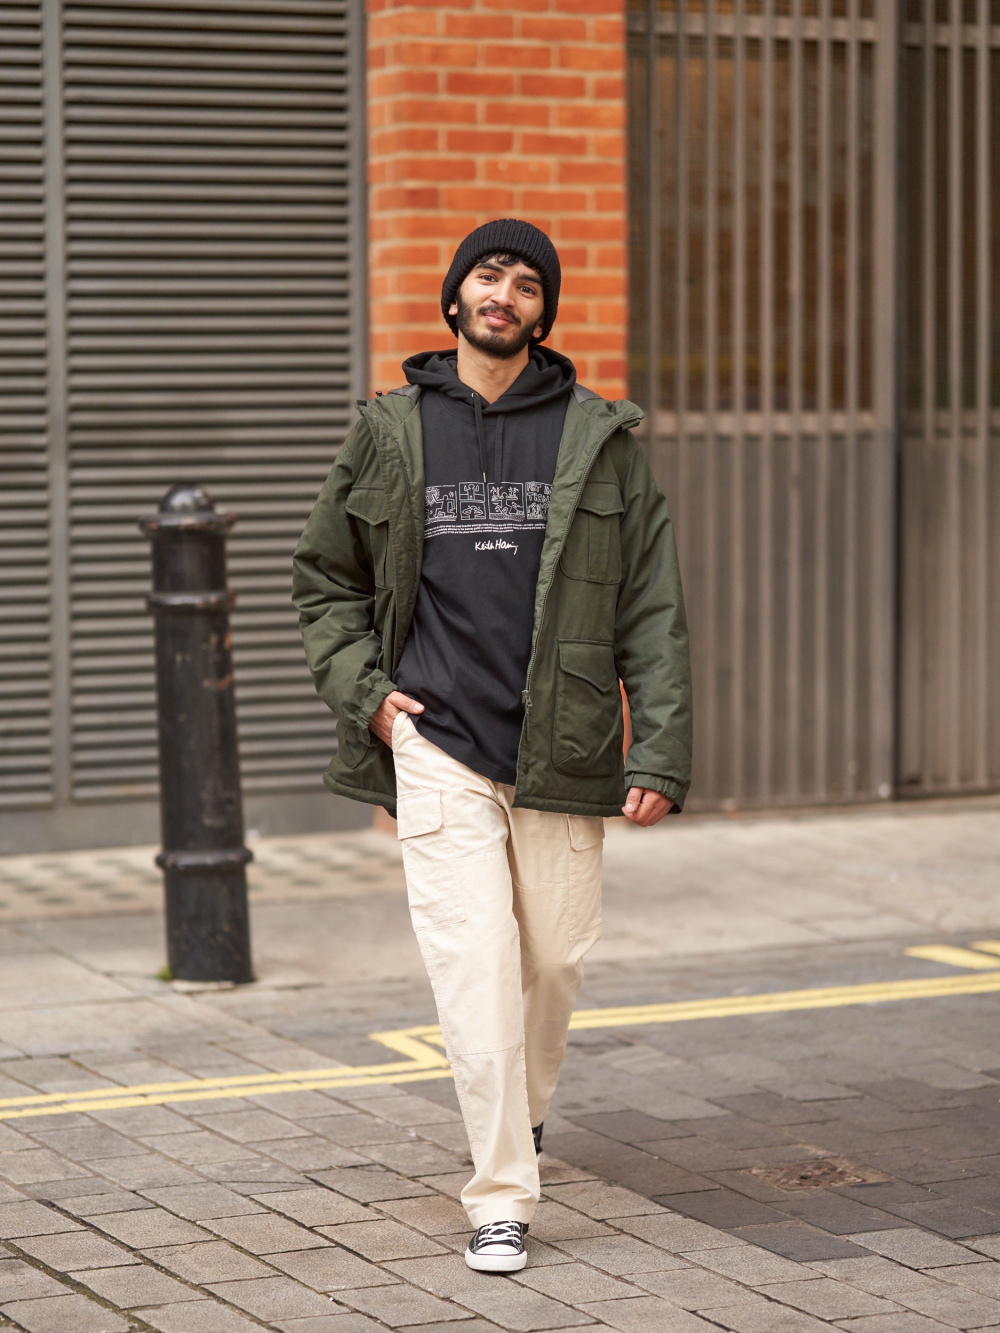 Check styling ideas for「U Crew Neck T-Shirt、Cargo Pants」